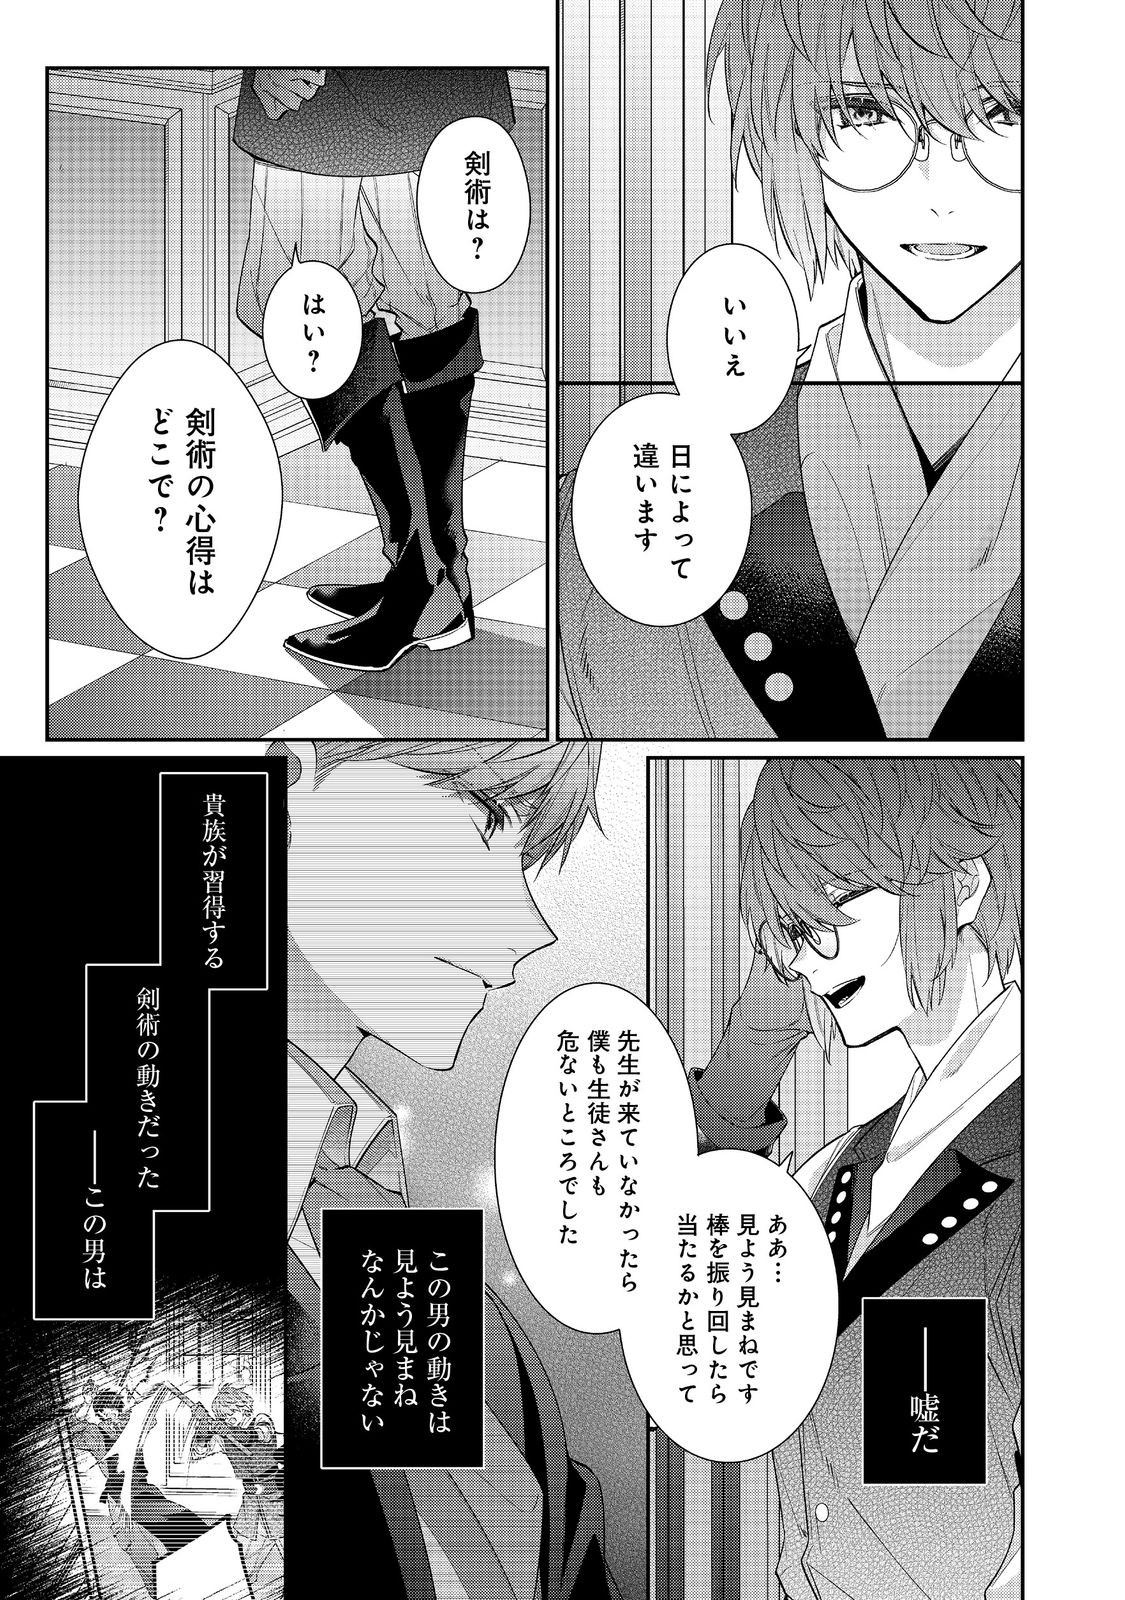 I Was Reincarnated As The Villainess In An Otome Game But The Boys Love Me Anyway! - Chapter 24.1 - Page 3